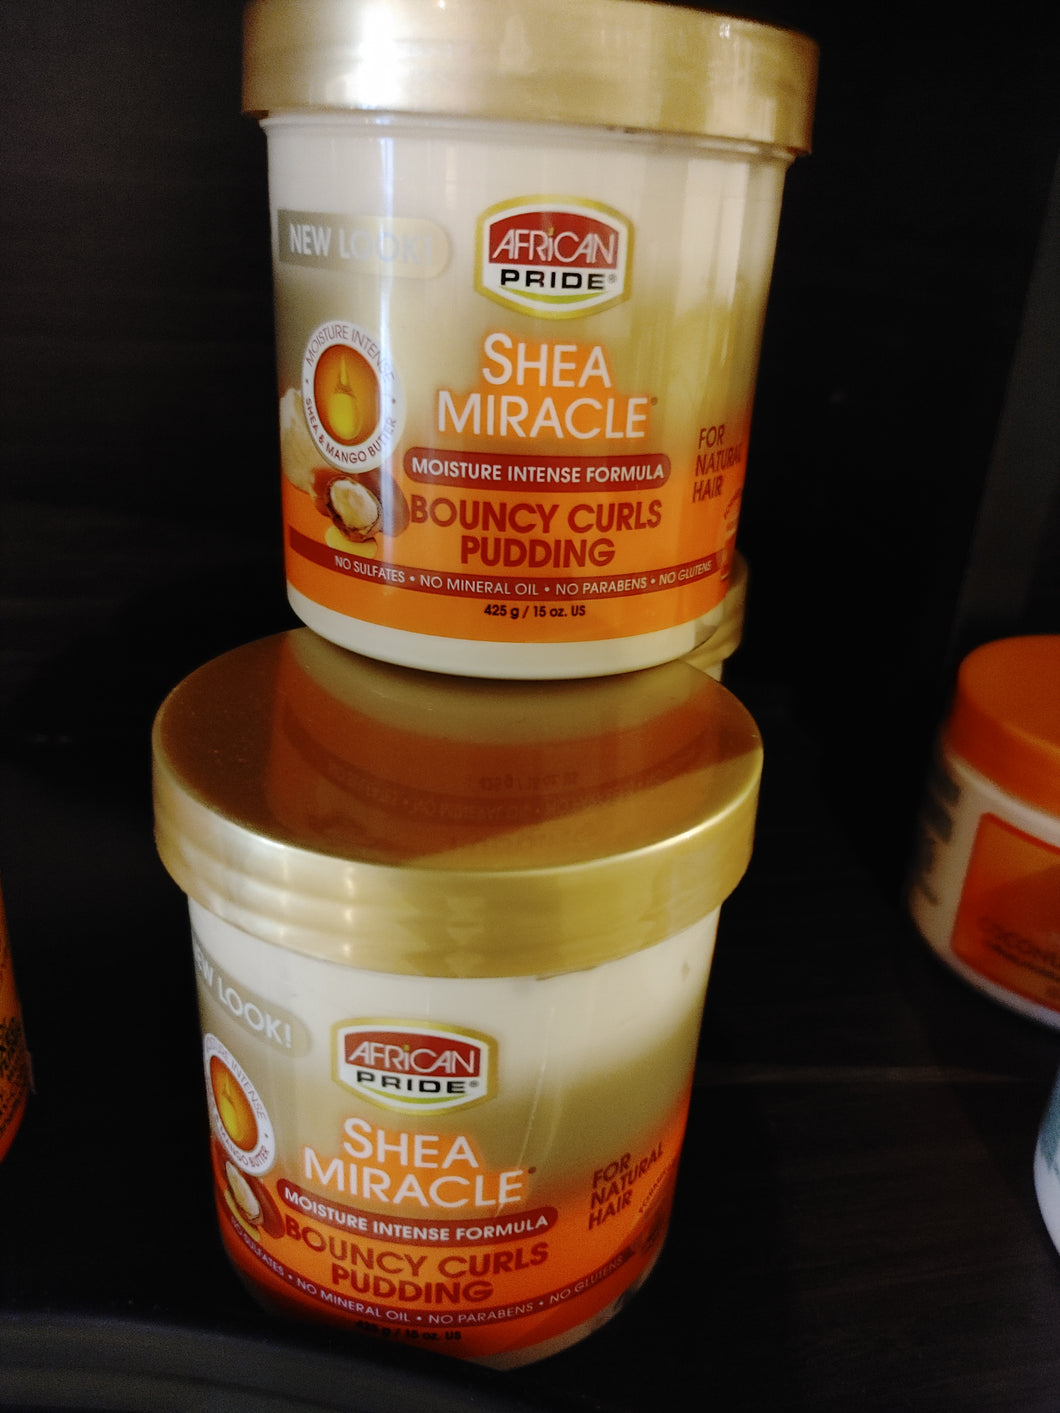 African Pride Shea Miracle Bouncy Curl Pudding